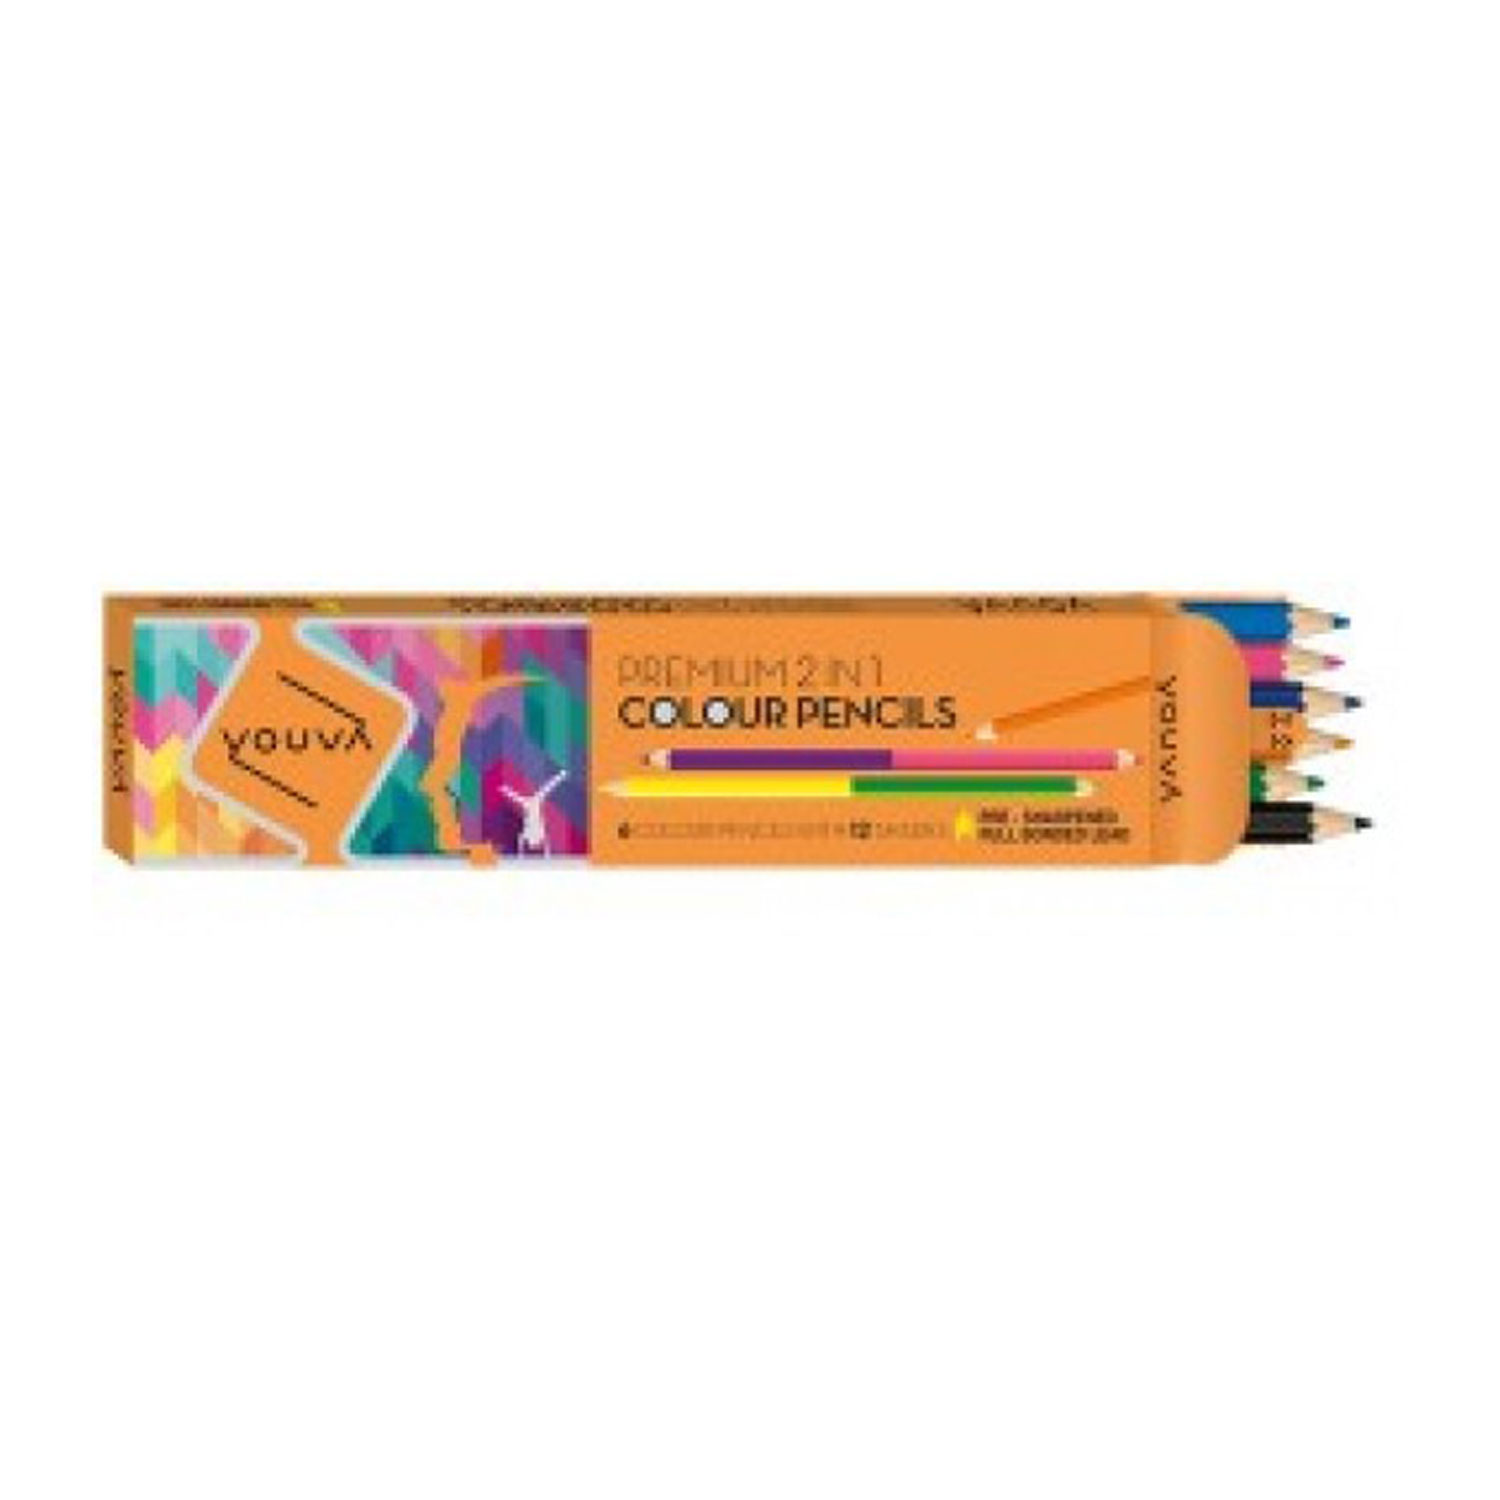  Colour Pencil 2 in 1 - (Pk of 6/12),VT35009| Youva|Pack of 12